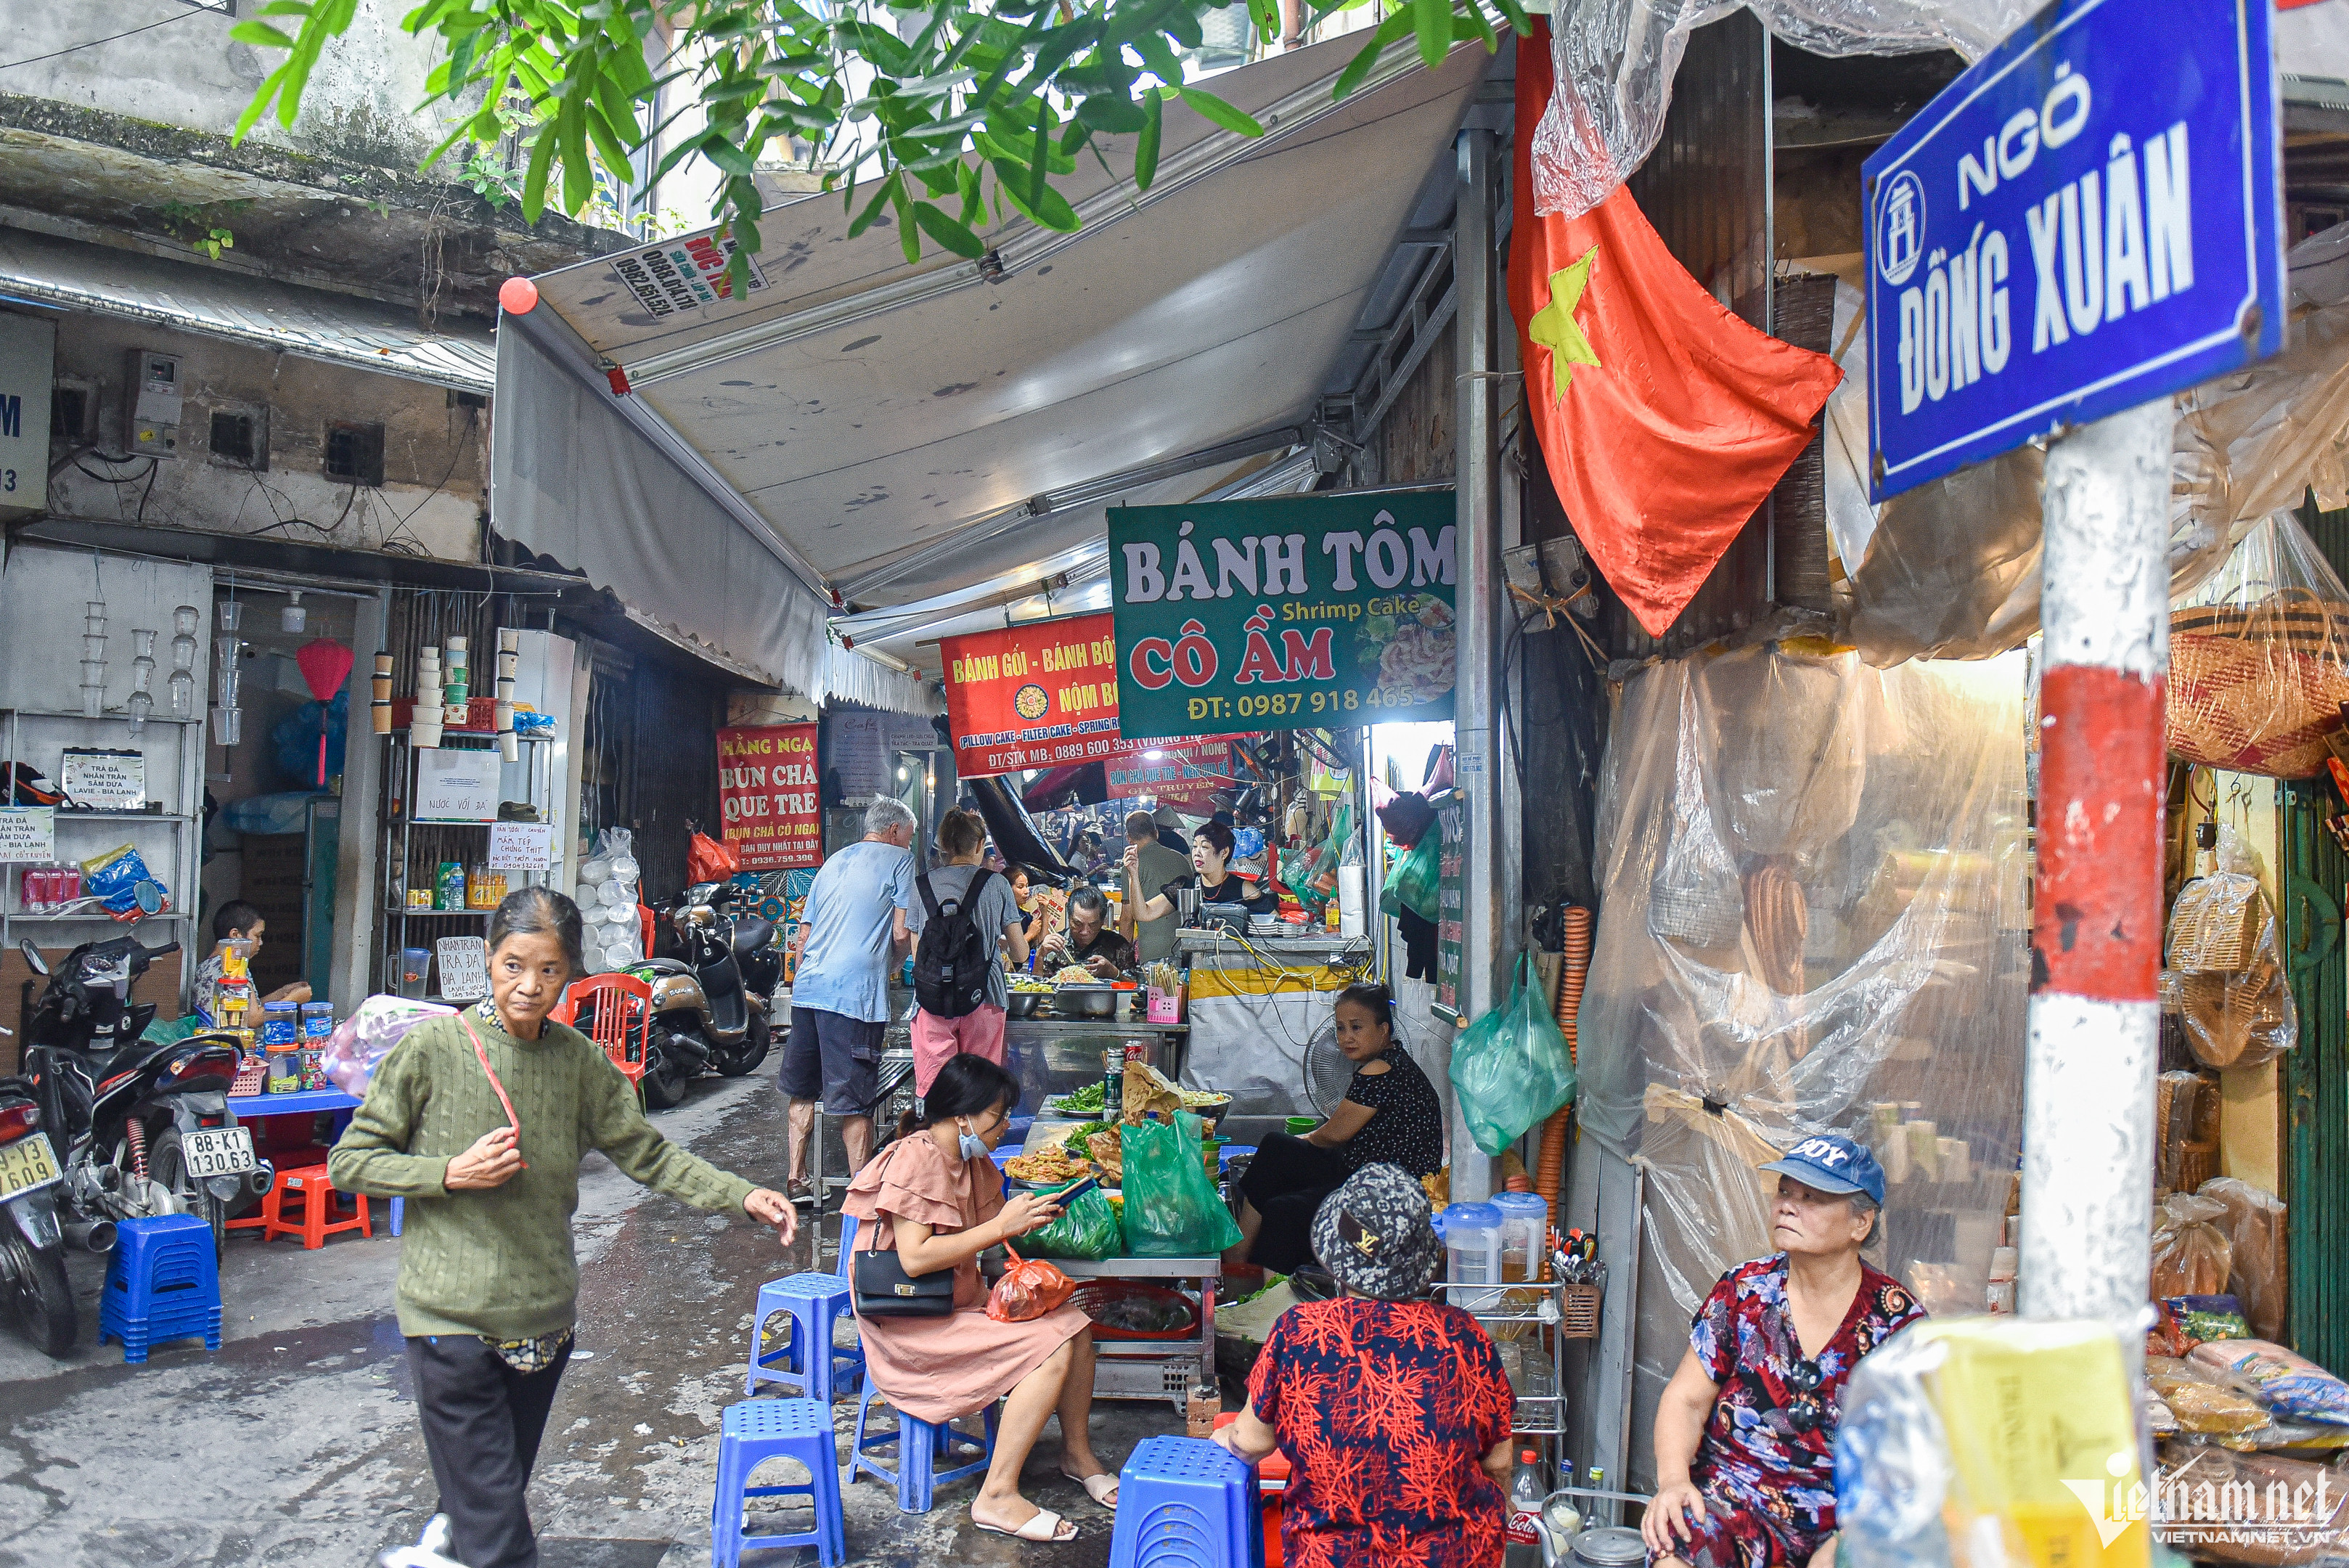 Choosing the right street food vendor is another crucial step in enjoying Hanoi's street food